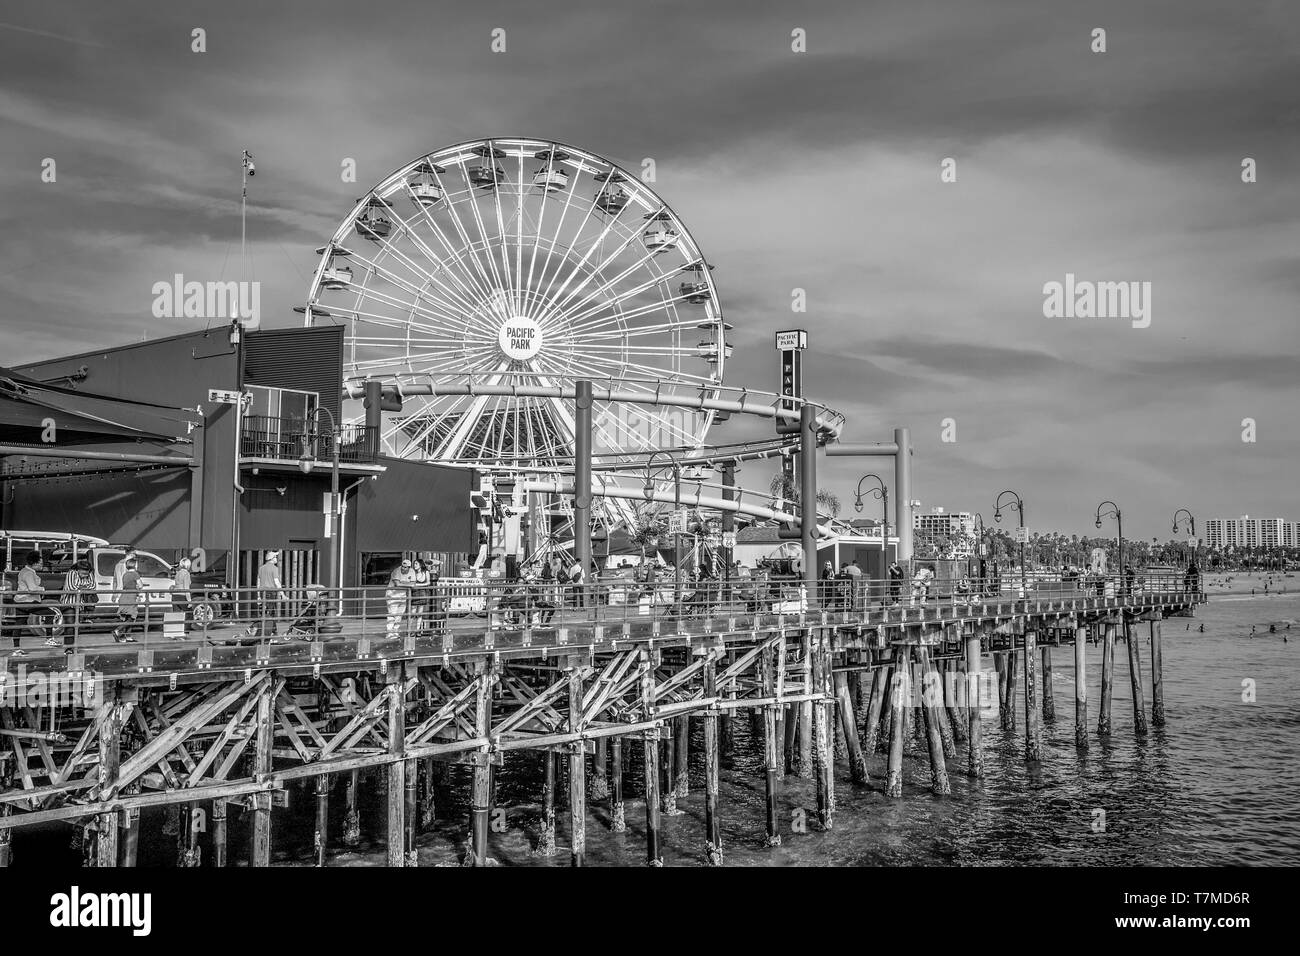 Ferris Wheel at Santa Monica Pier in Los Angeles - LOS ANGELES, UNITED STATES OF AMERICA - MARCH 29, 2019 Stock Photo